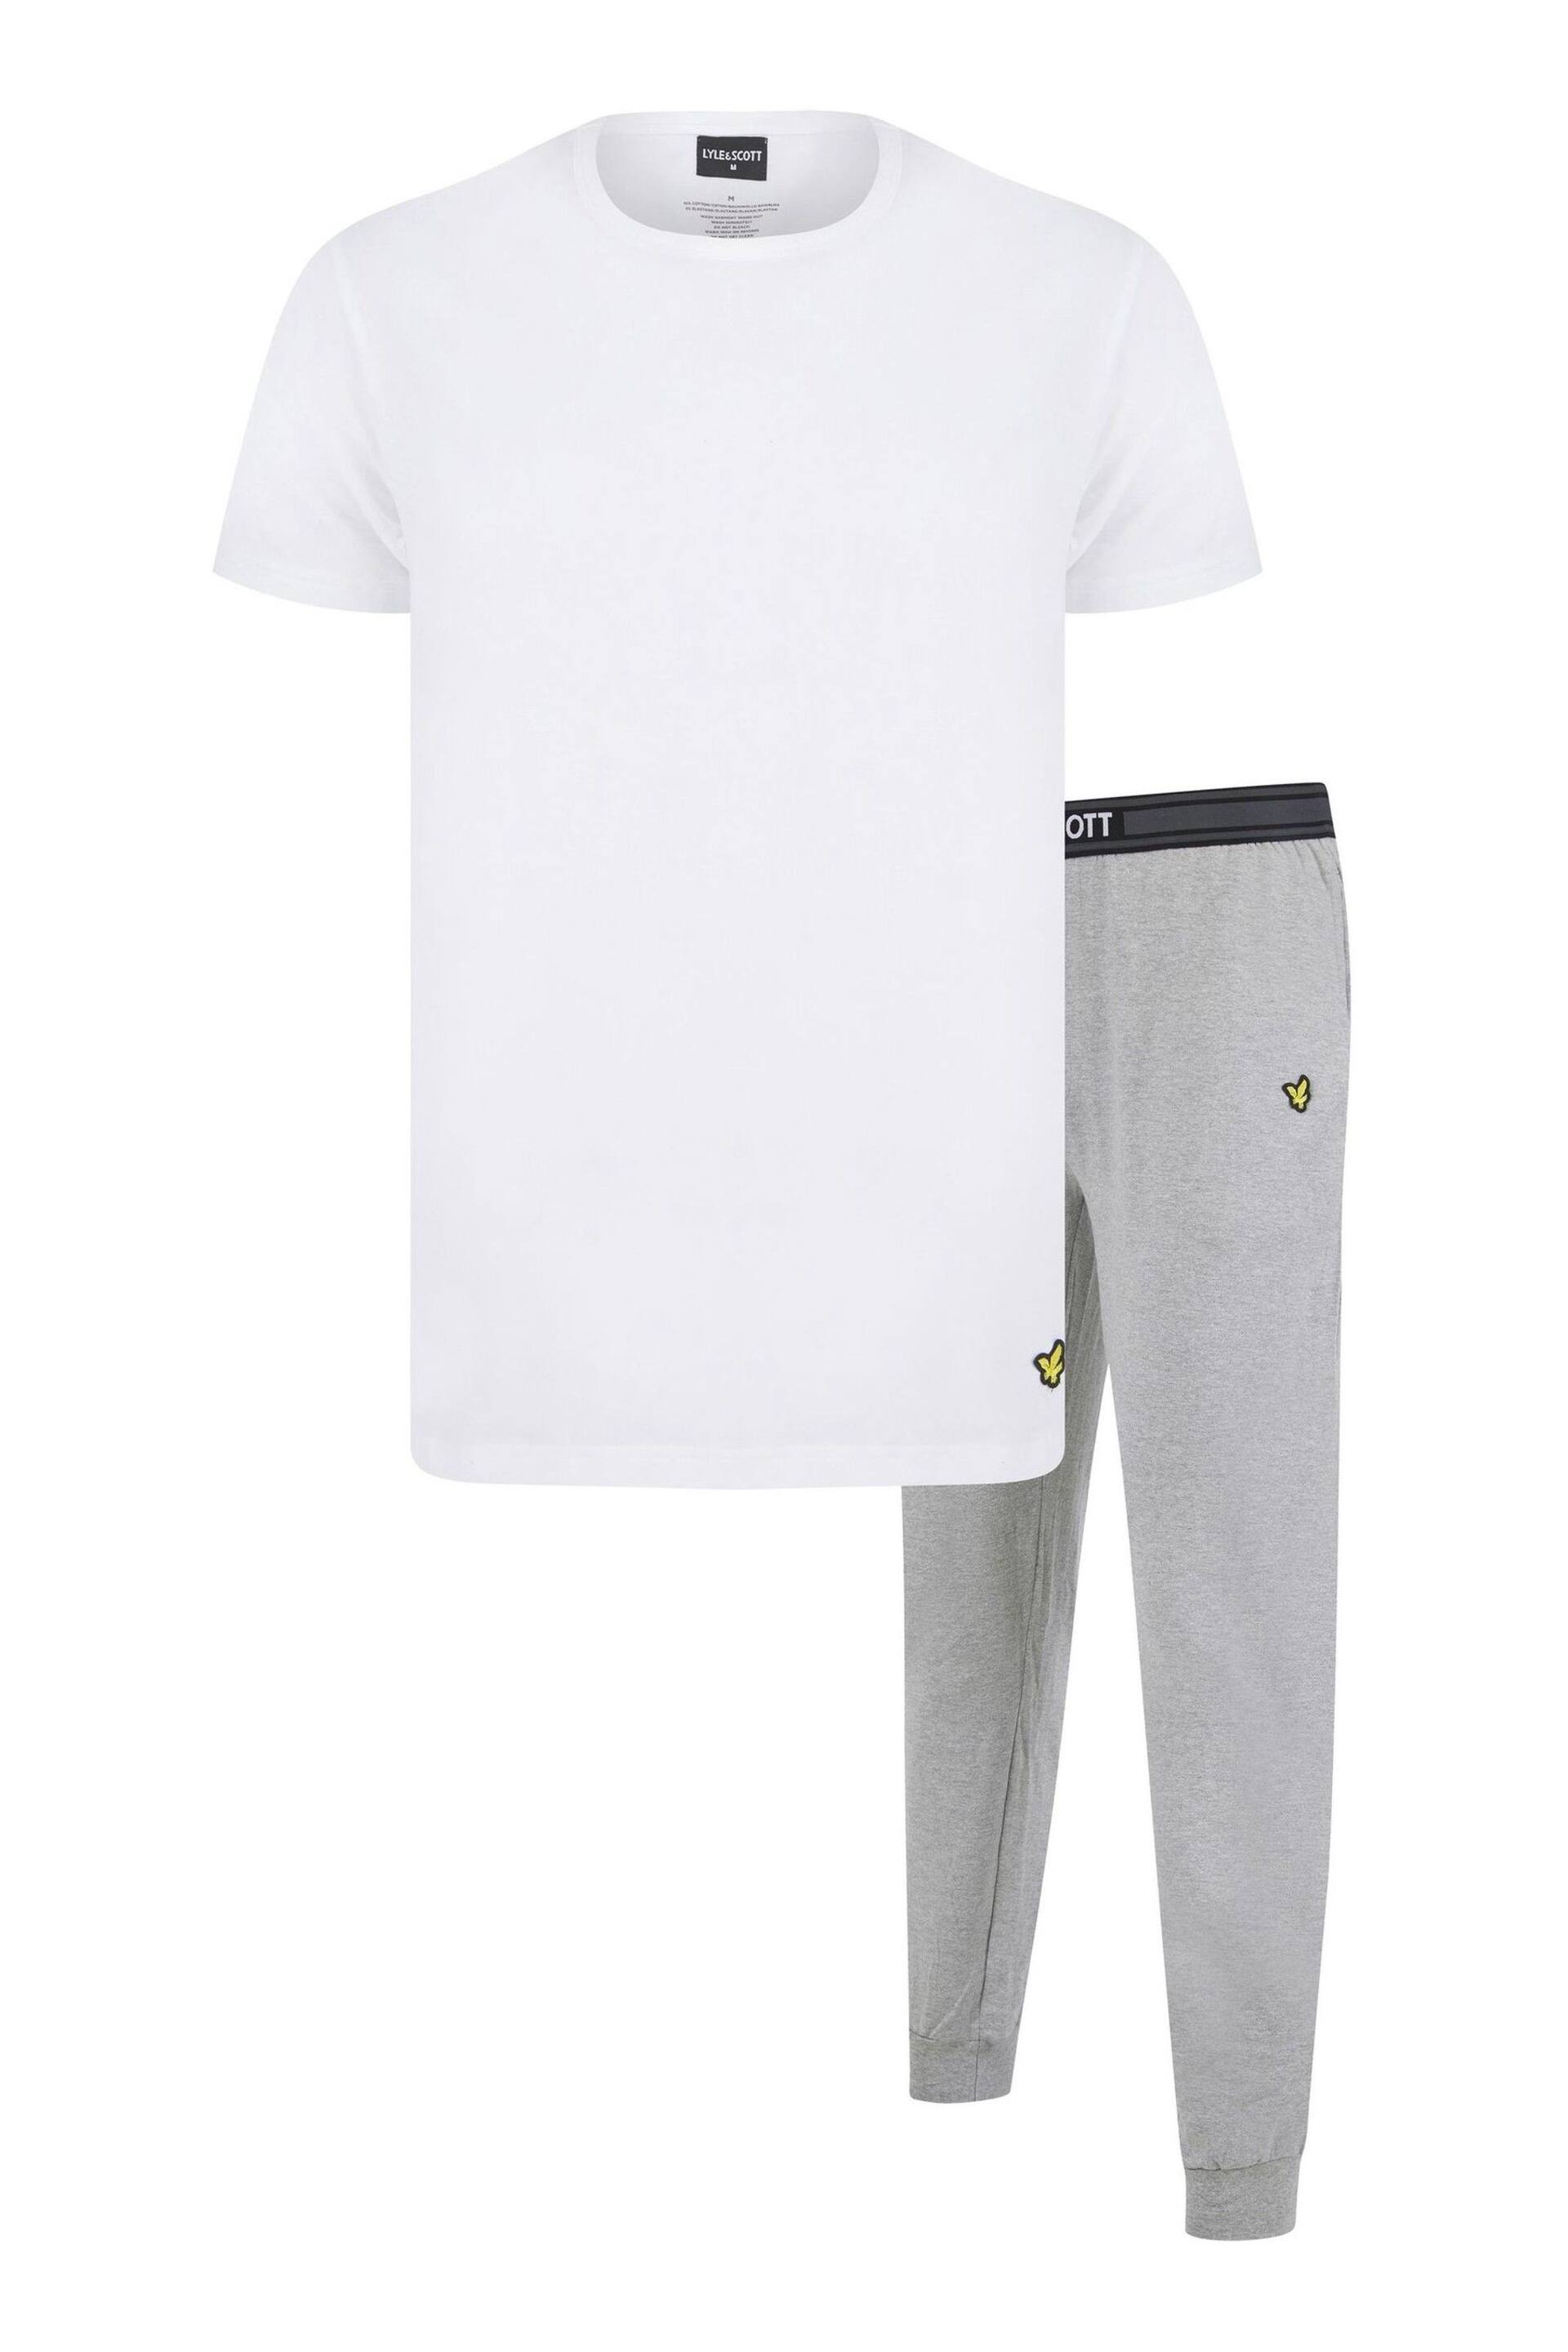 Lyle & Scott Grey Cash Top And Joggers Set - Image 1 of 6